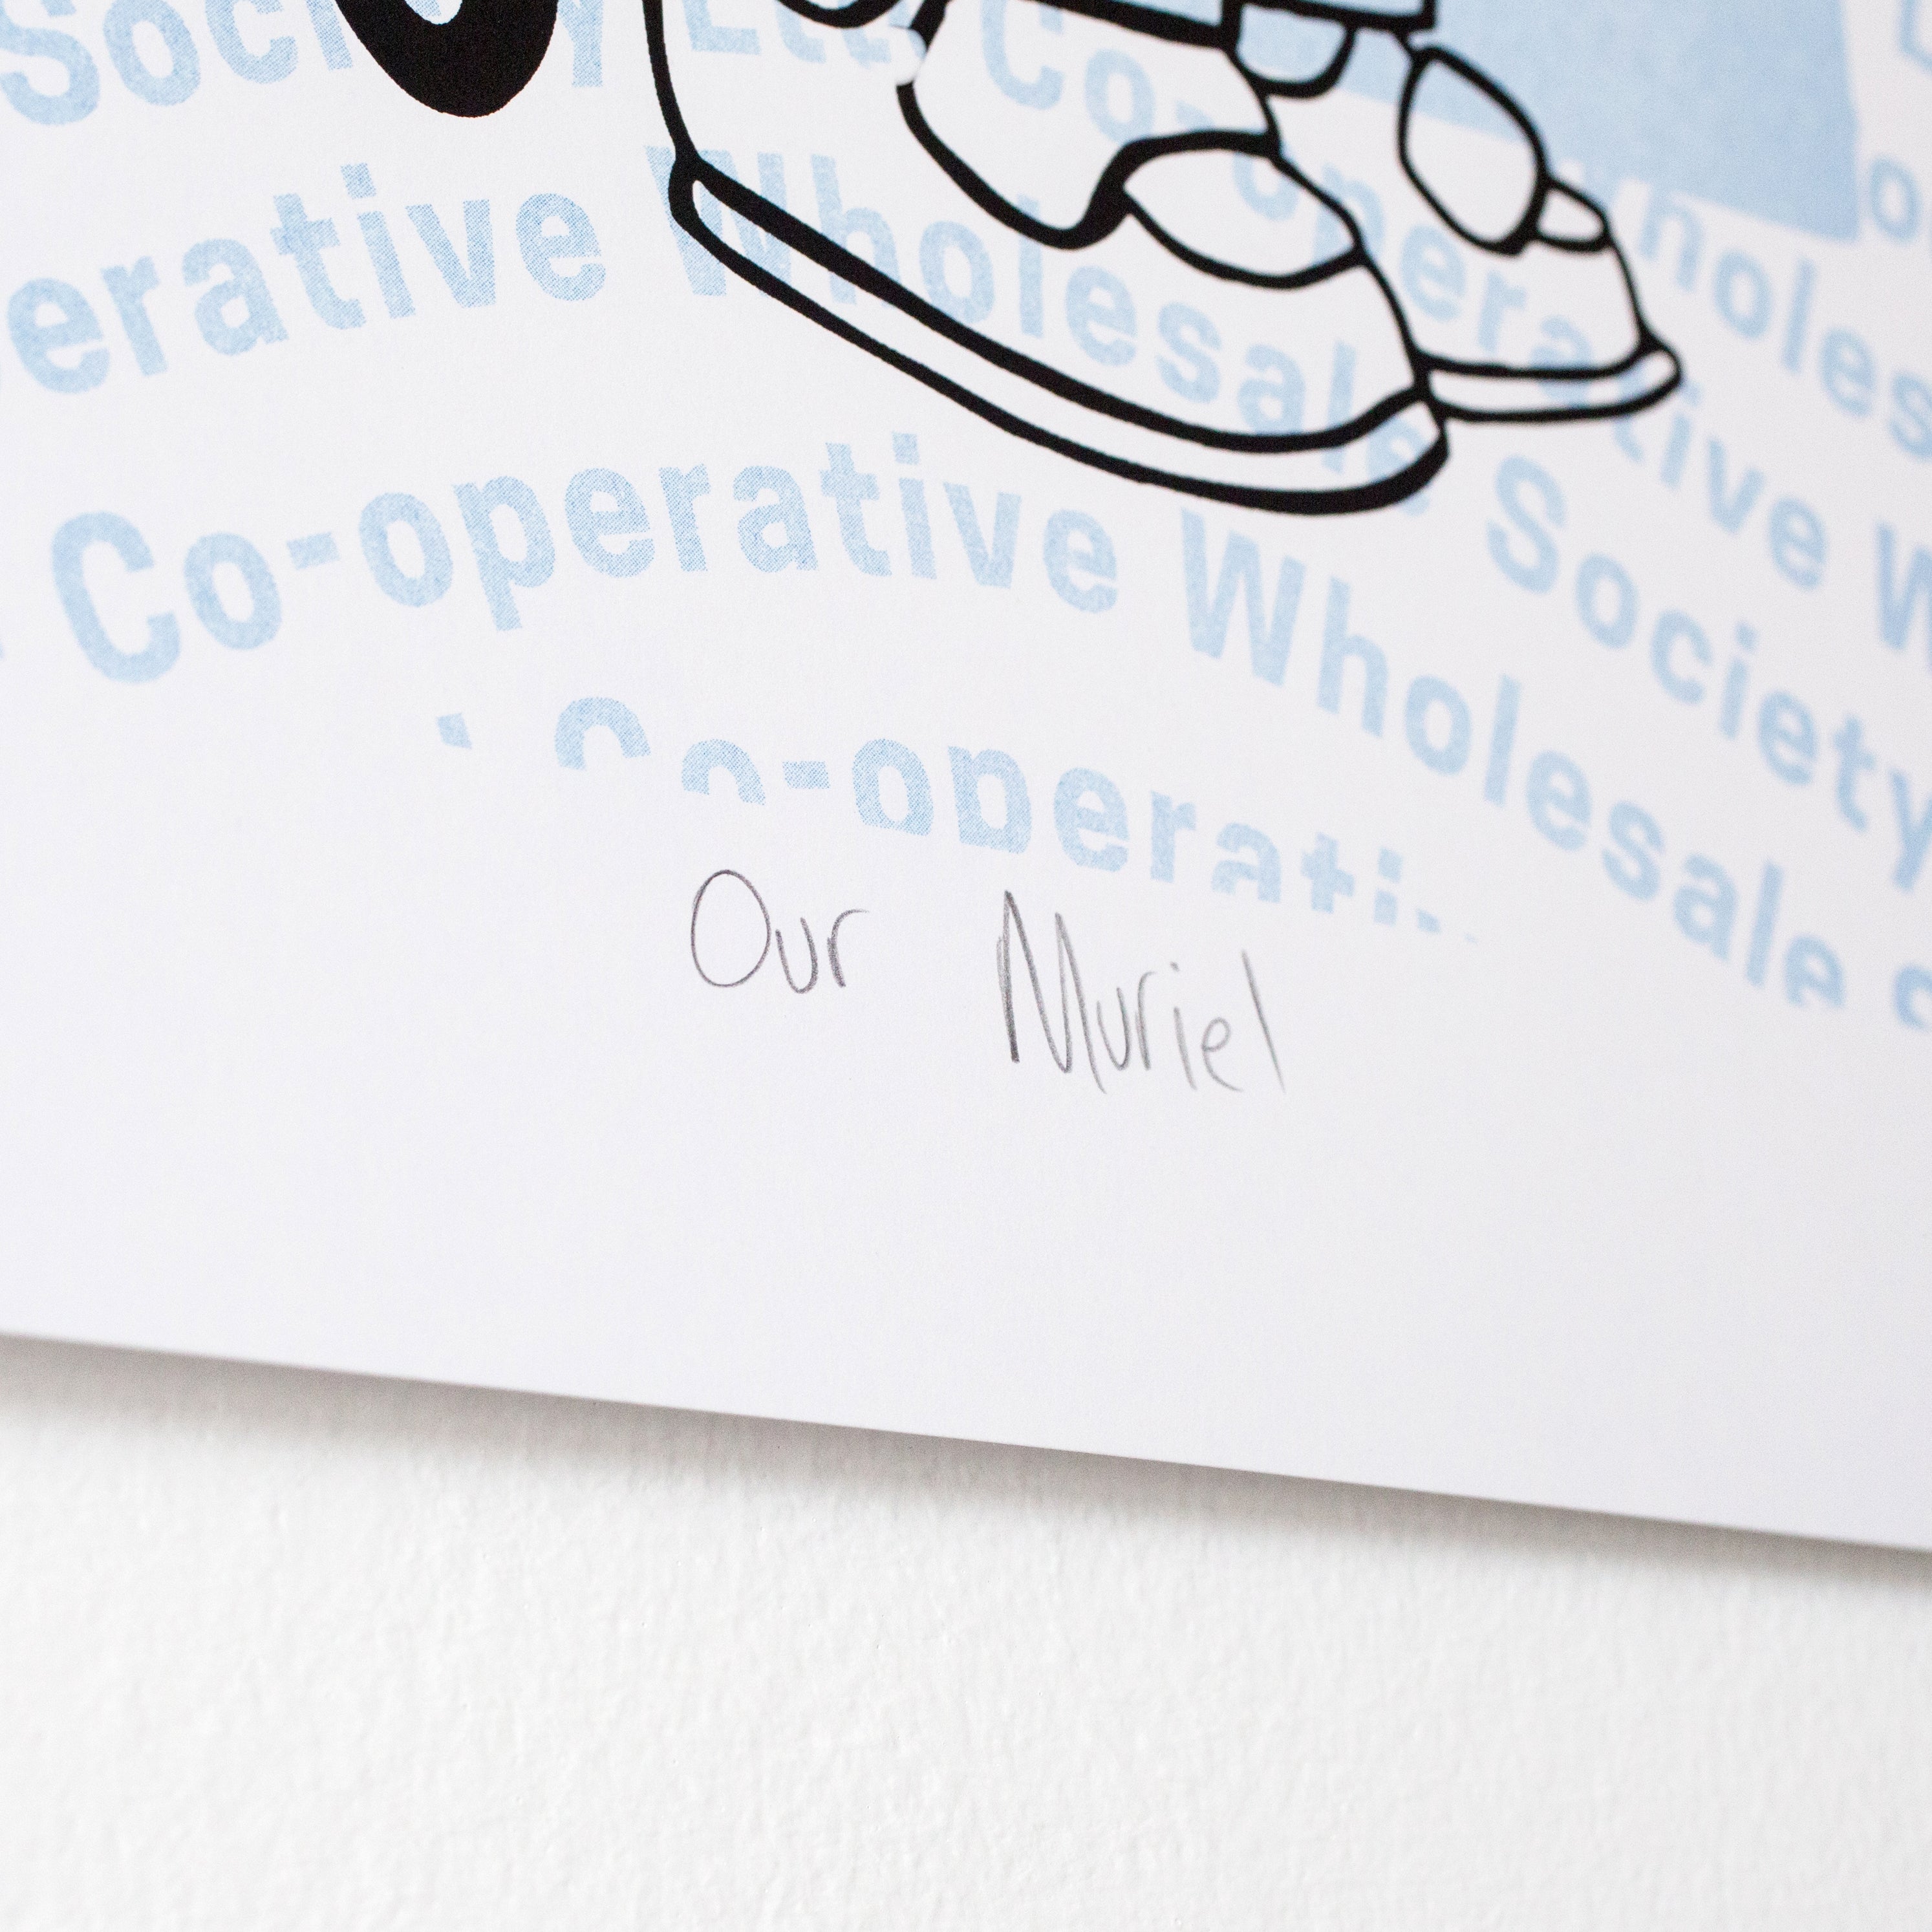 Our Muriel - Limited Edition Print